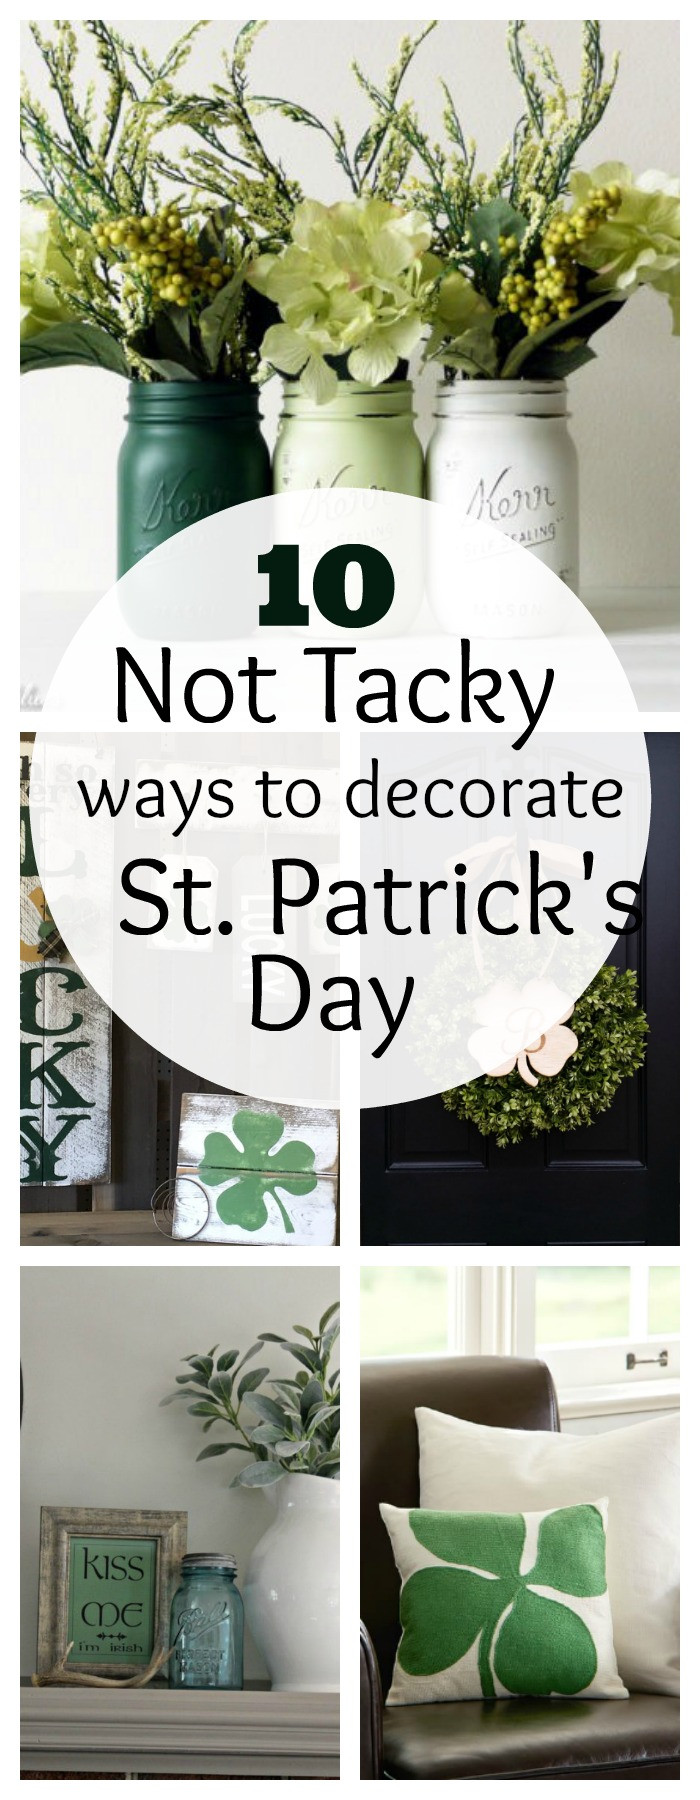 St Patrick's Day Decor
 10 Not Tacky Ways to Decorate for St Patrick s Day The